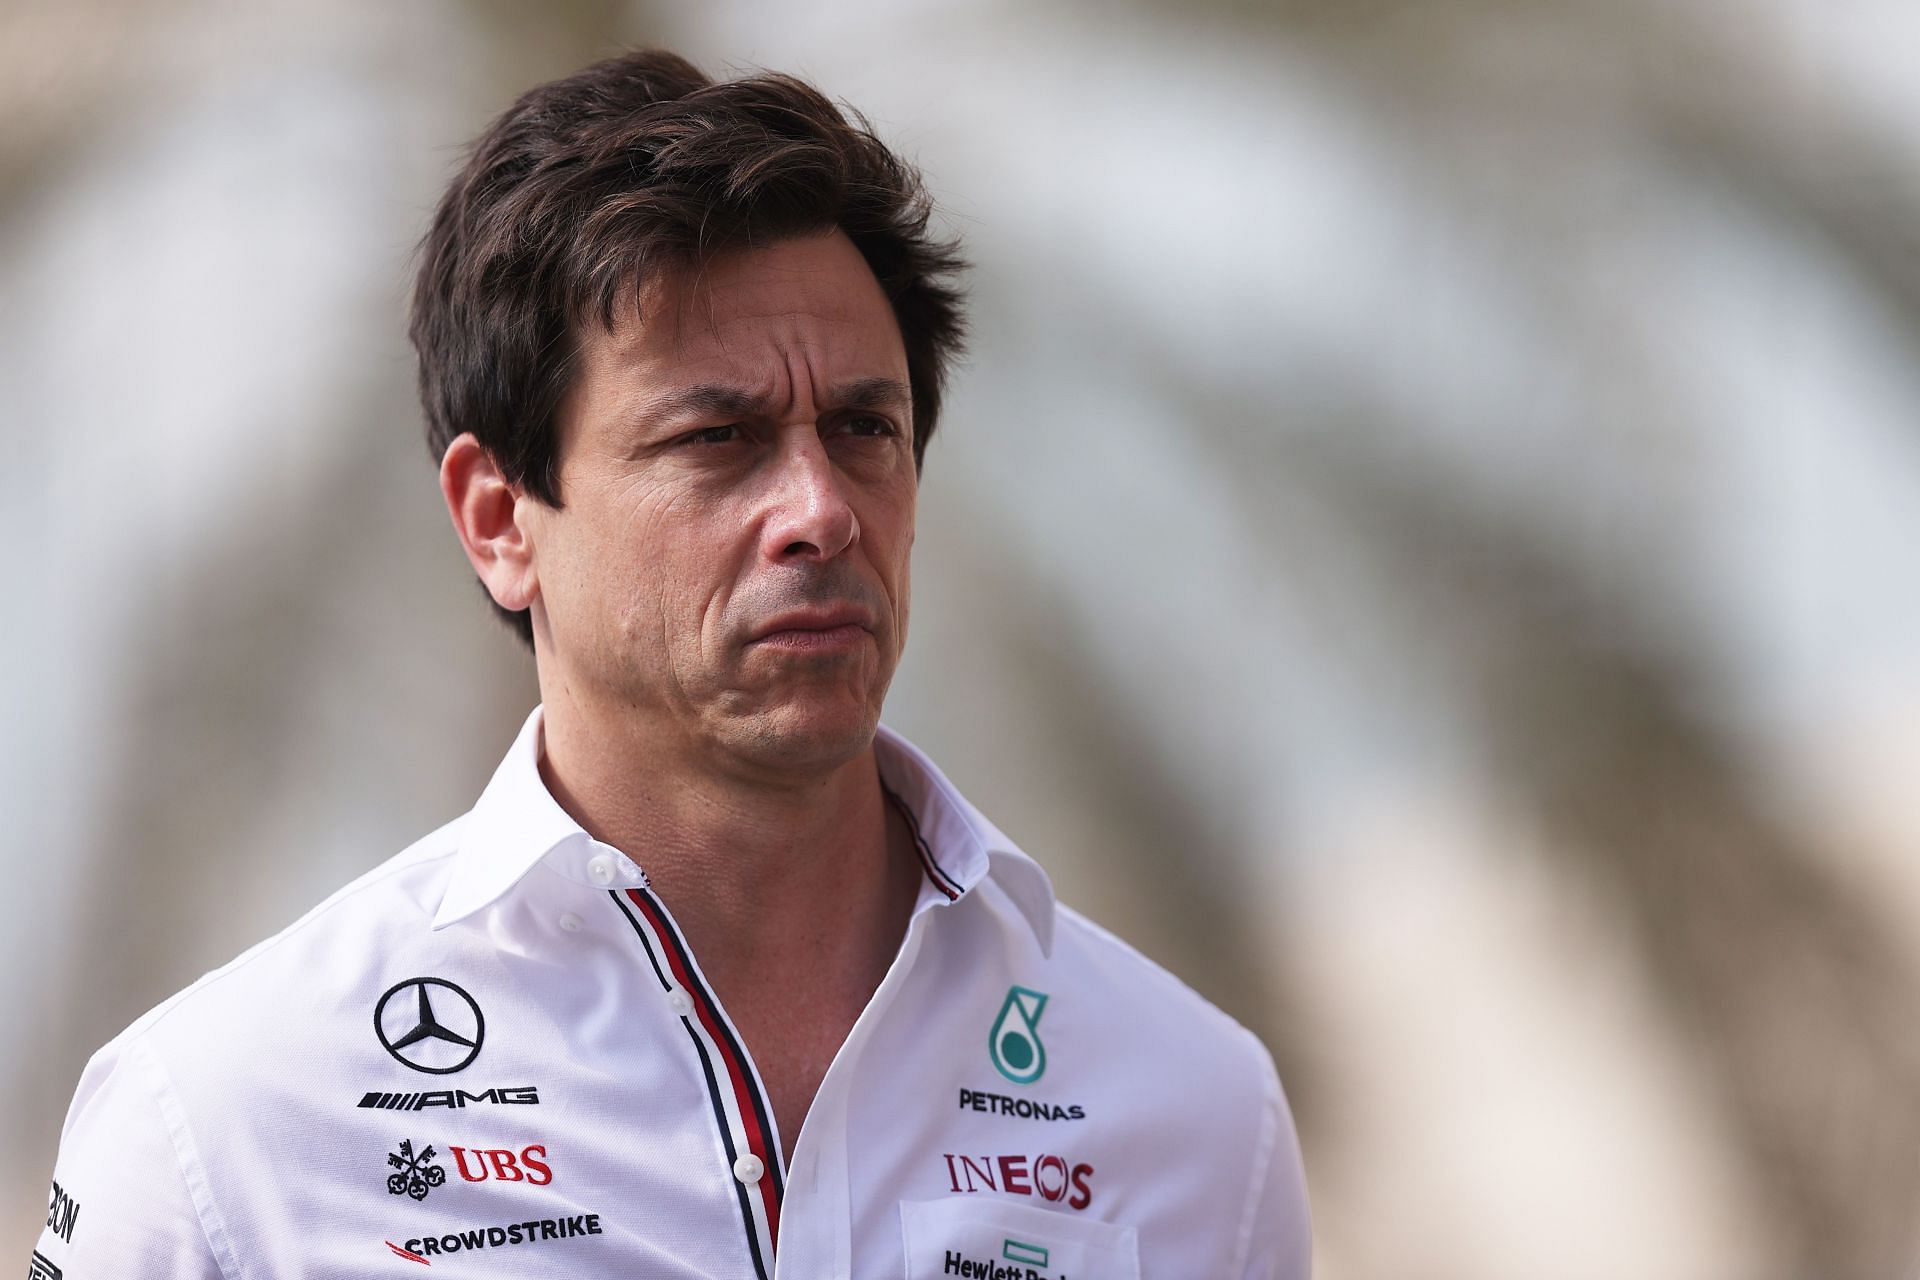 Mercedes F1 team executive director Toto Wolff in the paddock before the 2021 season finale (Photo by Lars Baron/Getty Images)